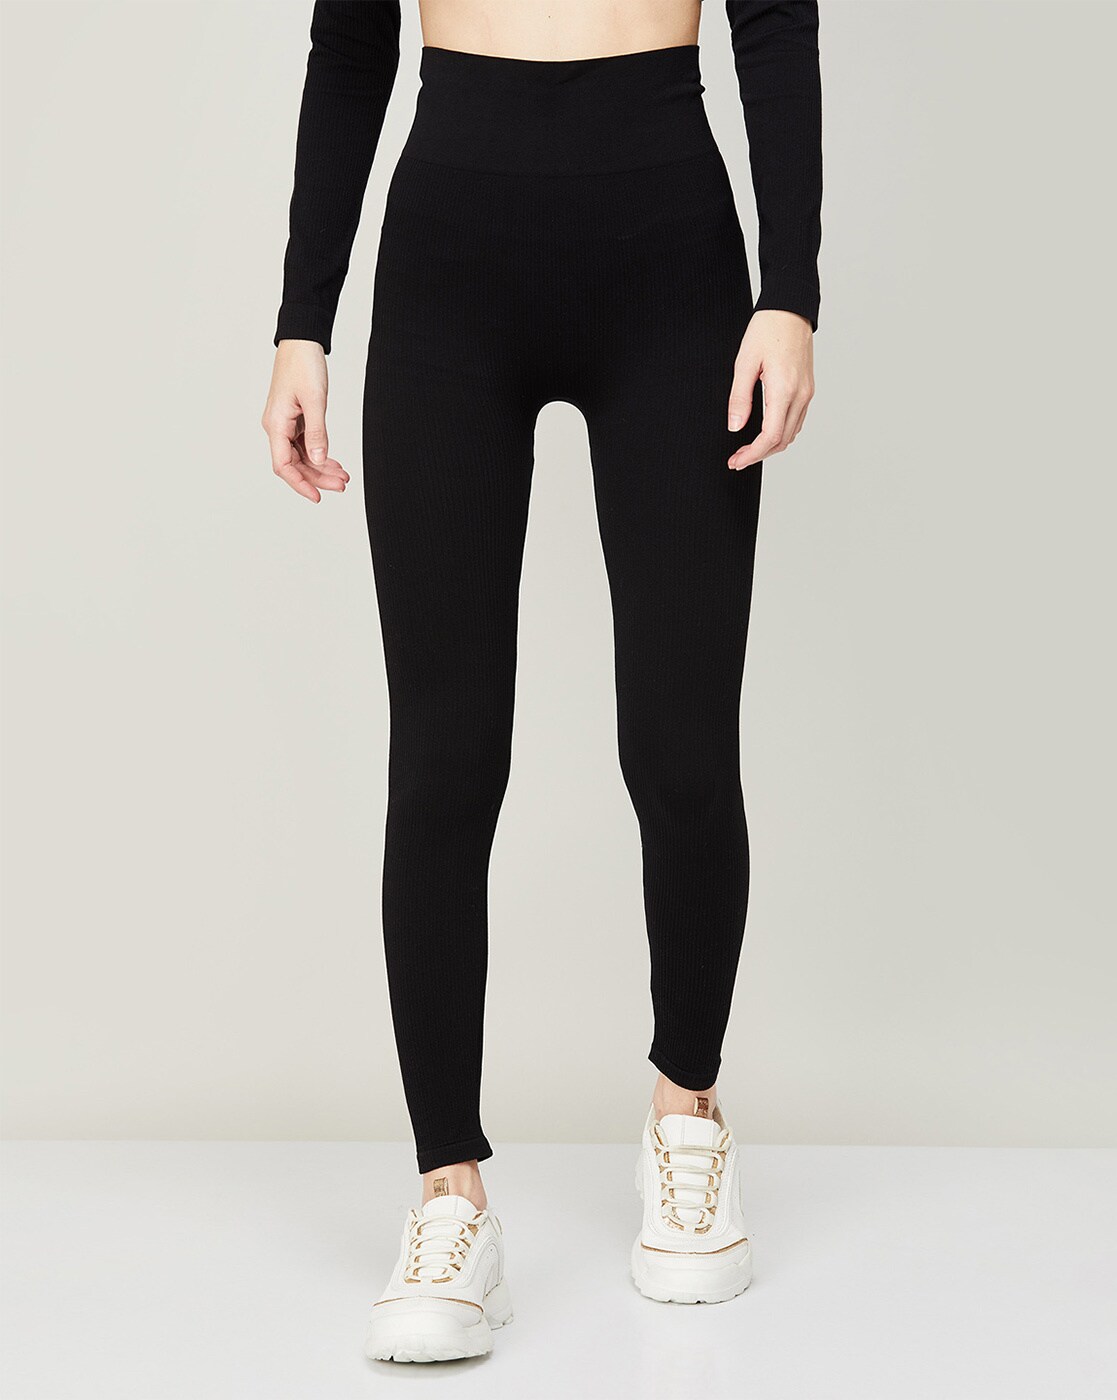 Buy Black Trousers & Pants for Women by Ginger by Lifestyle Online